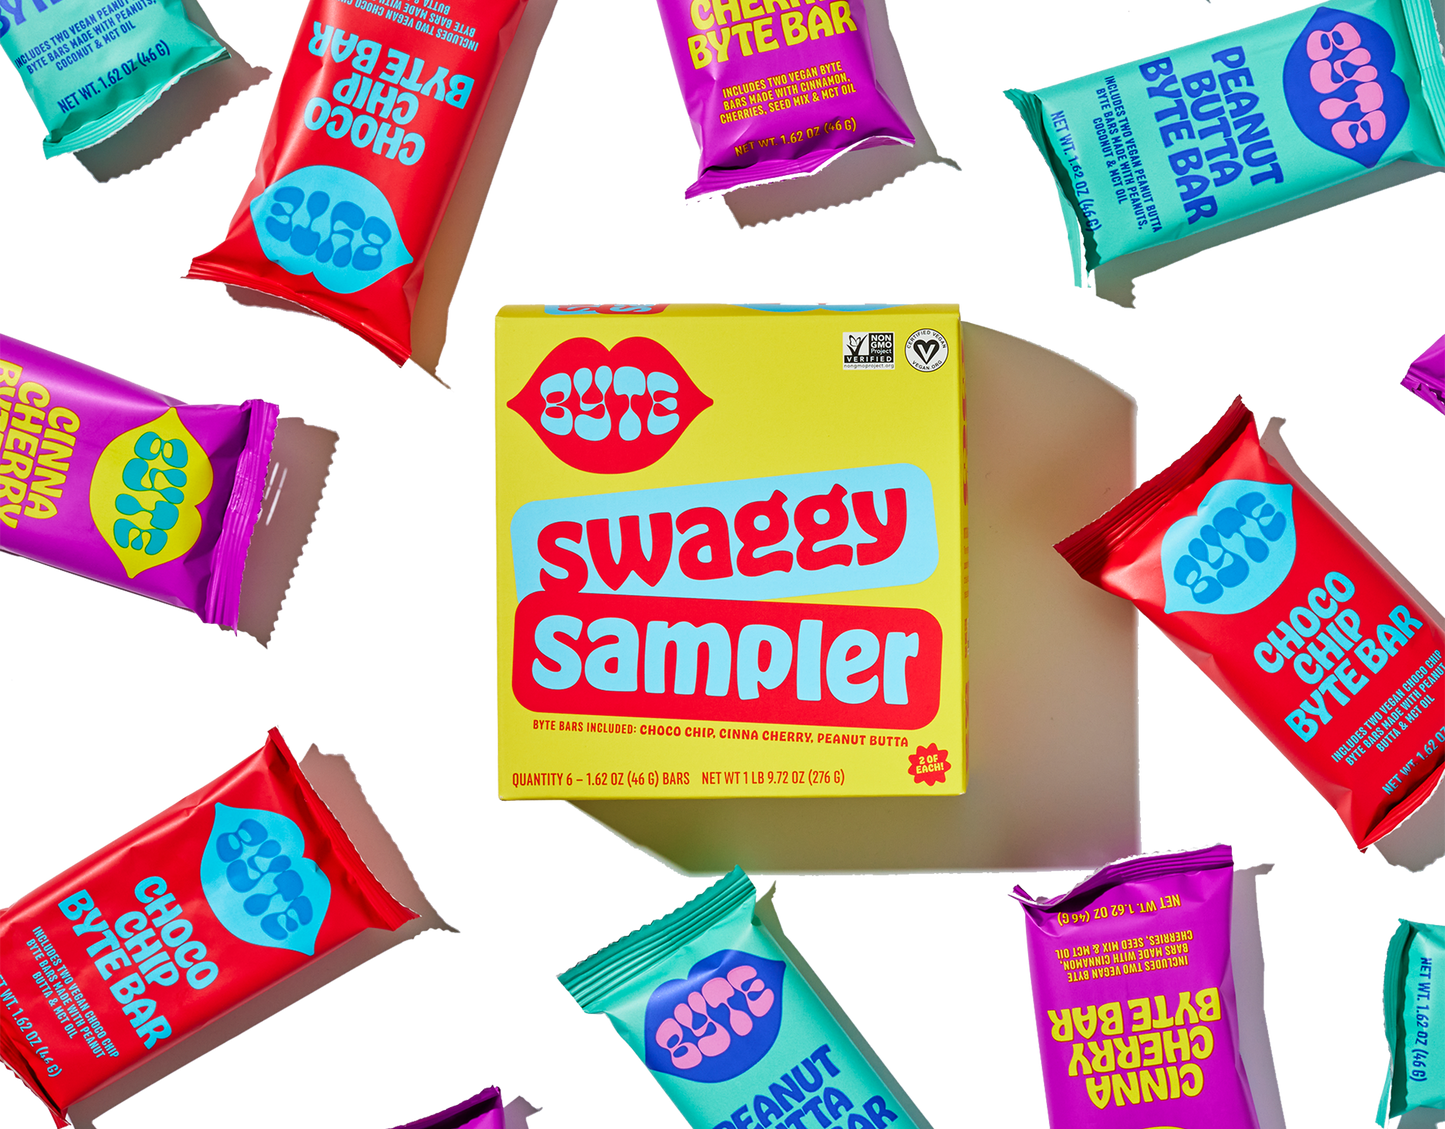 Swaggy Sampler